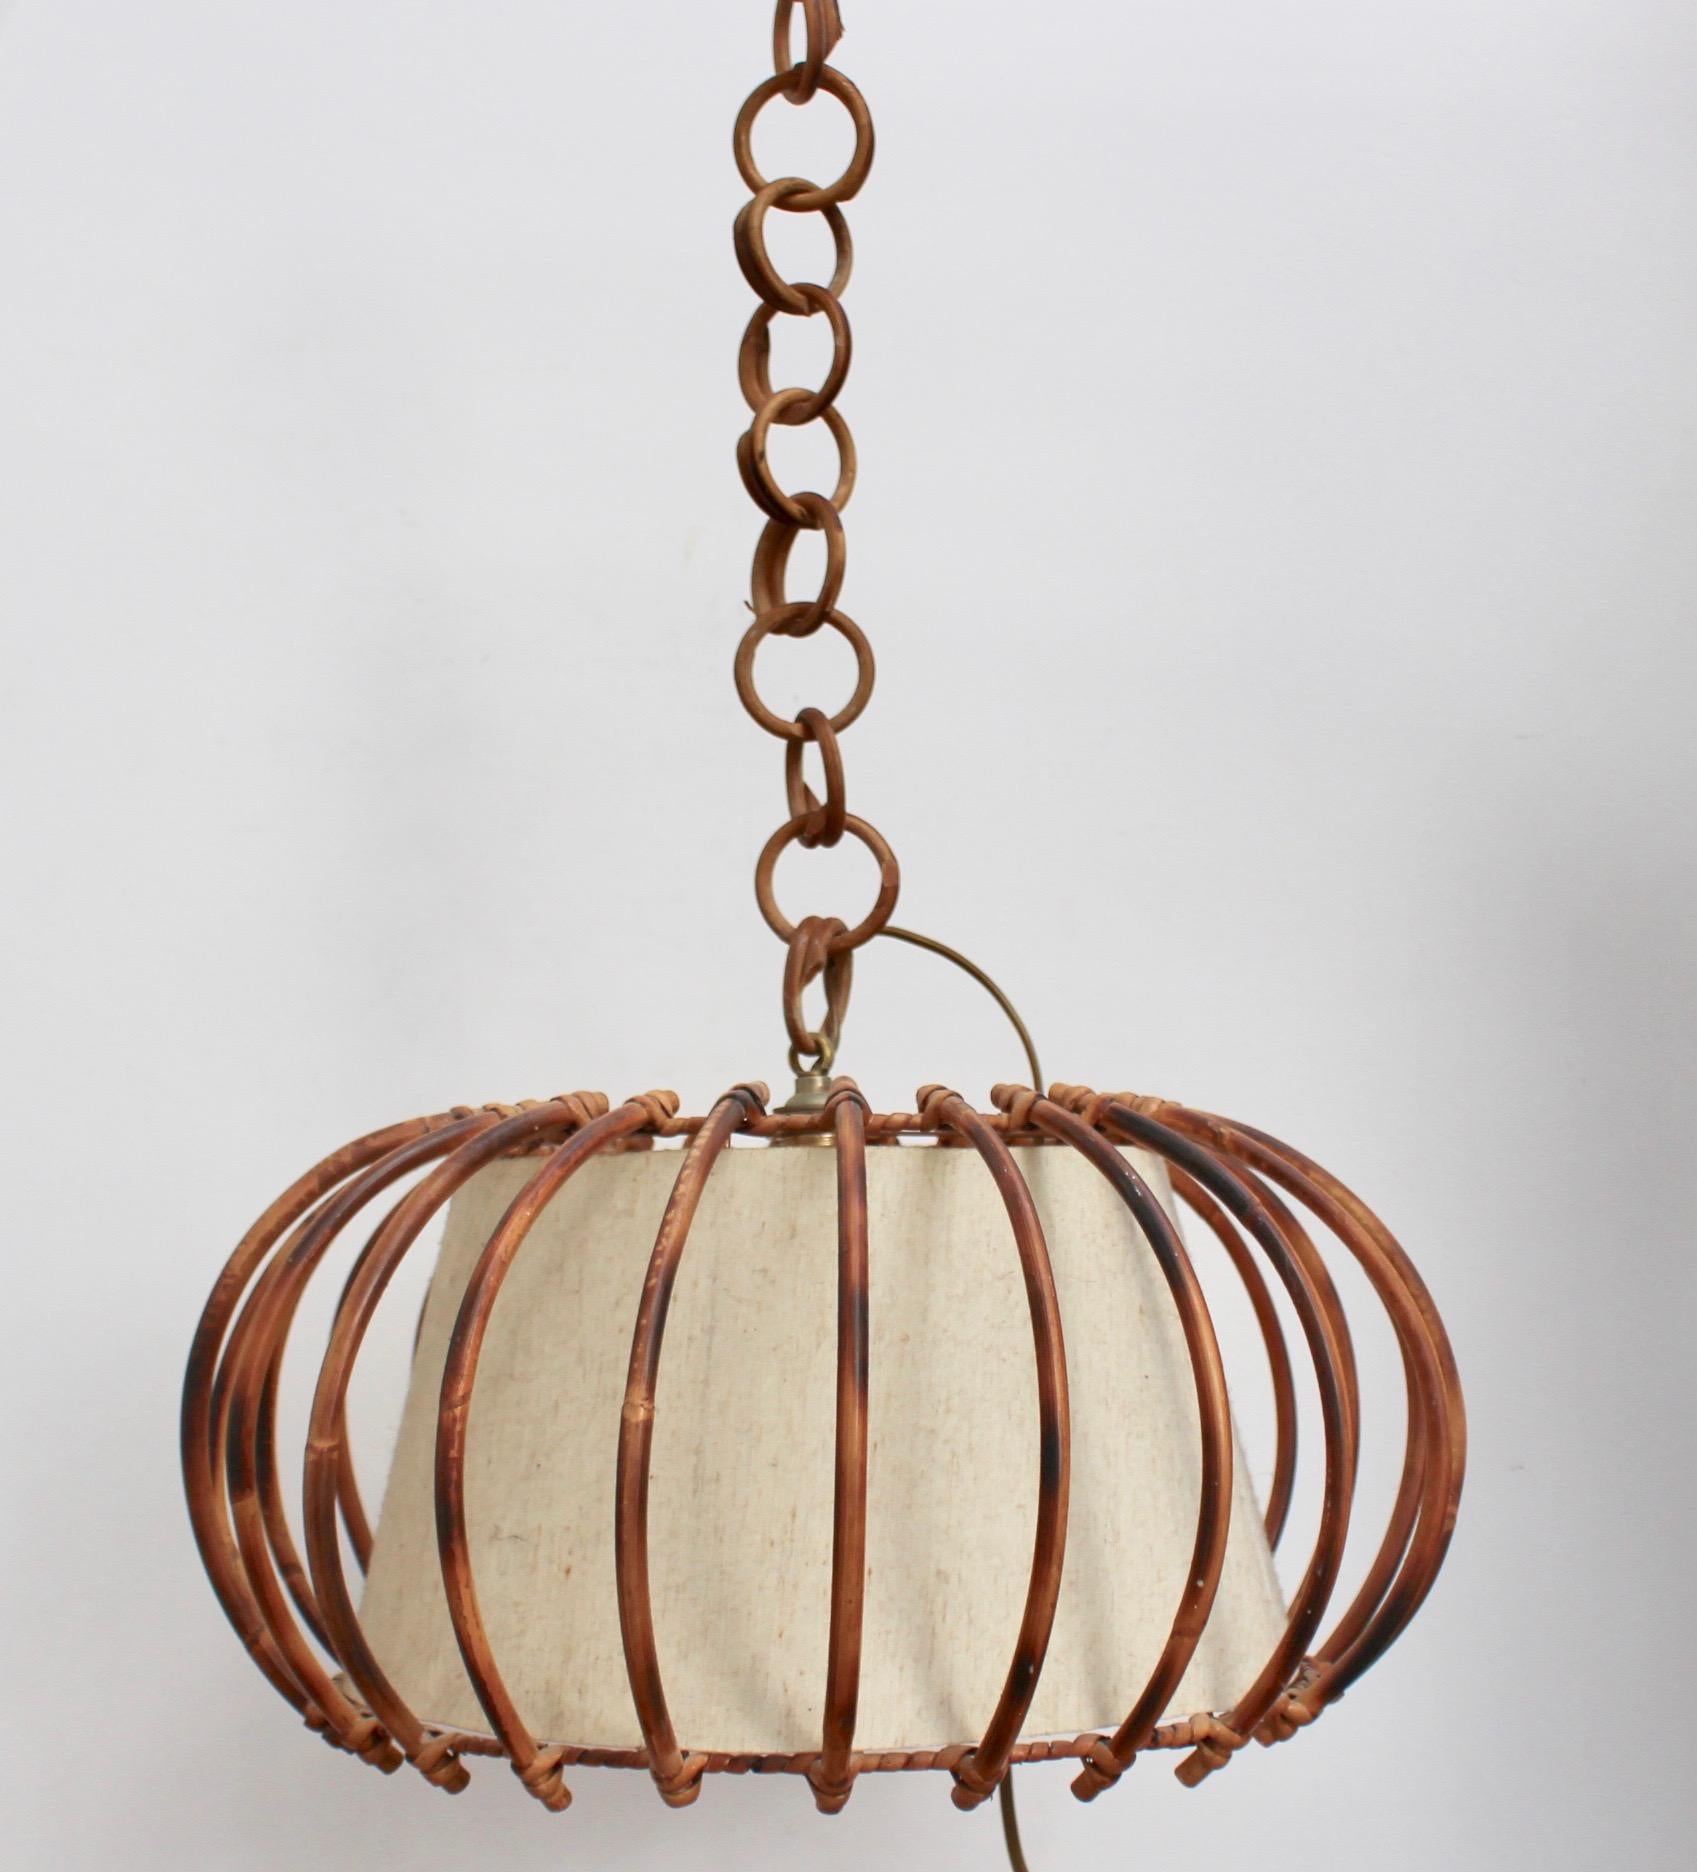 Midcentury French rattan pendant lamp (circa 1960s). Delightfully original, this piece transports you to the French Riviera at the height of its glamour. Hanging with its attached rattan chain, the light fixture consists of a supporting round rattan